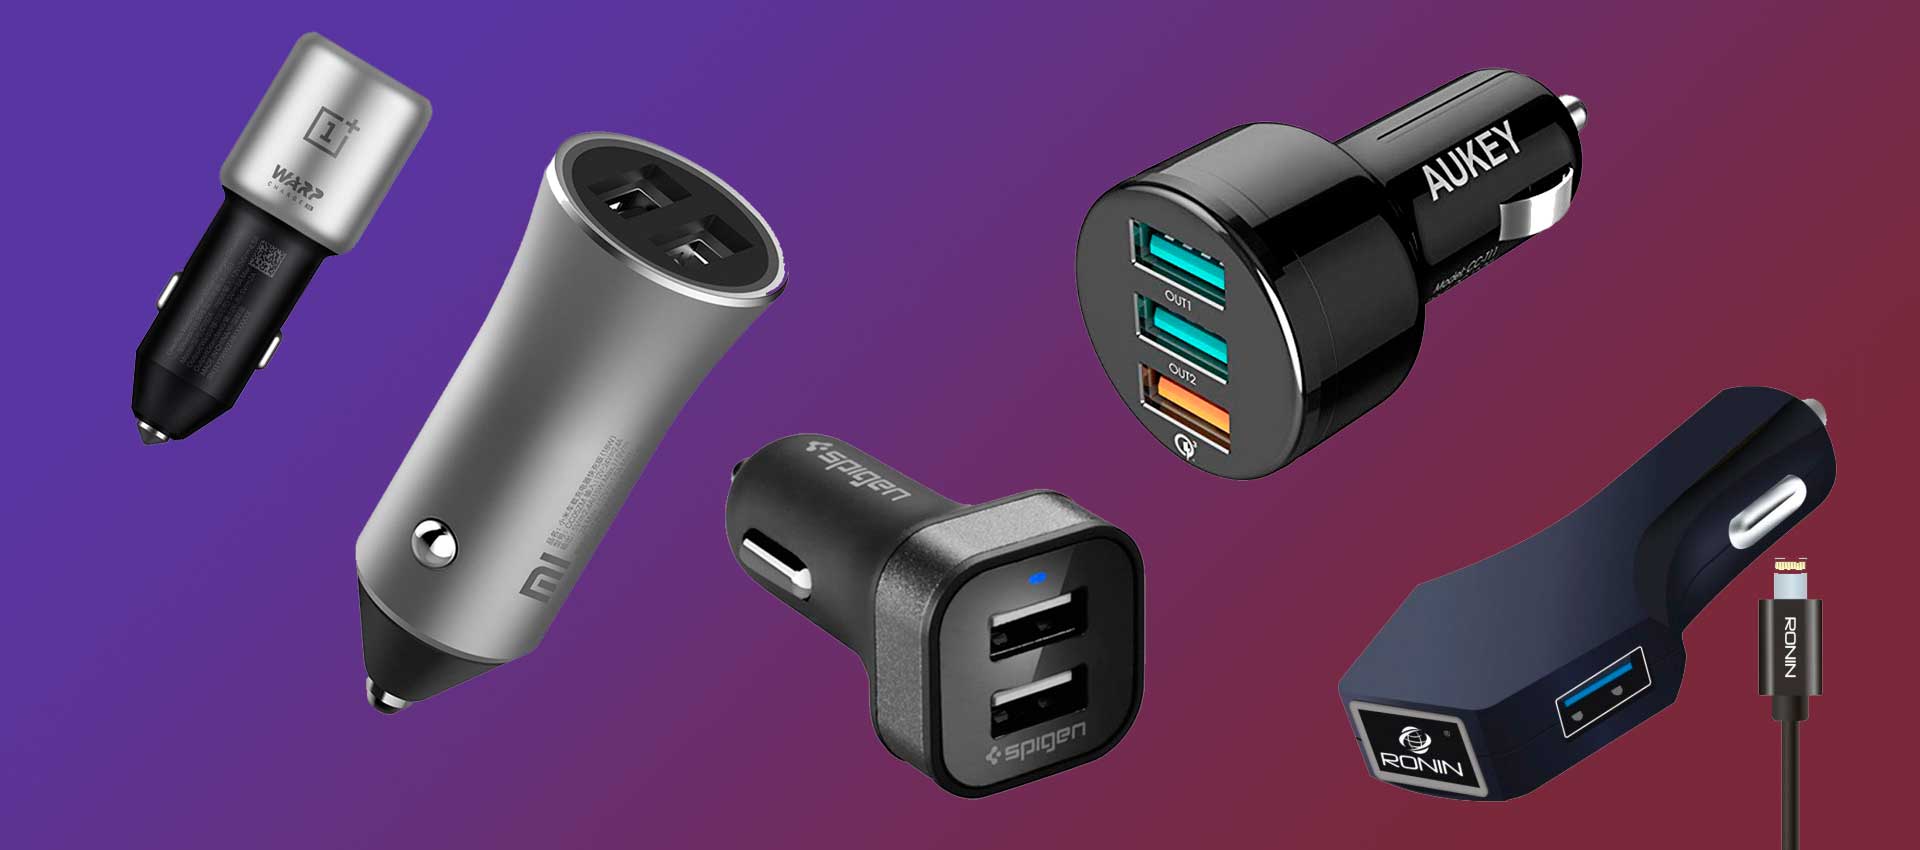 13 Best Car Chargers Available In Pakistan-Charge Your Phones Easily On The Go!